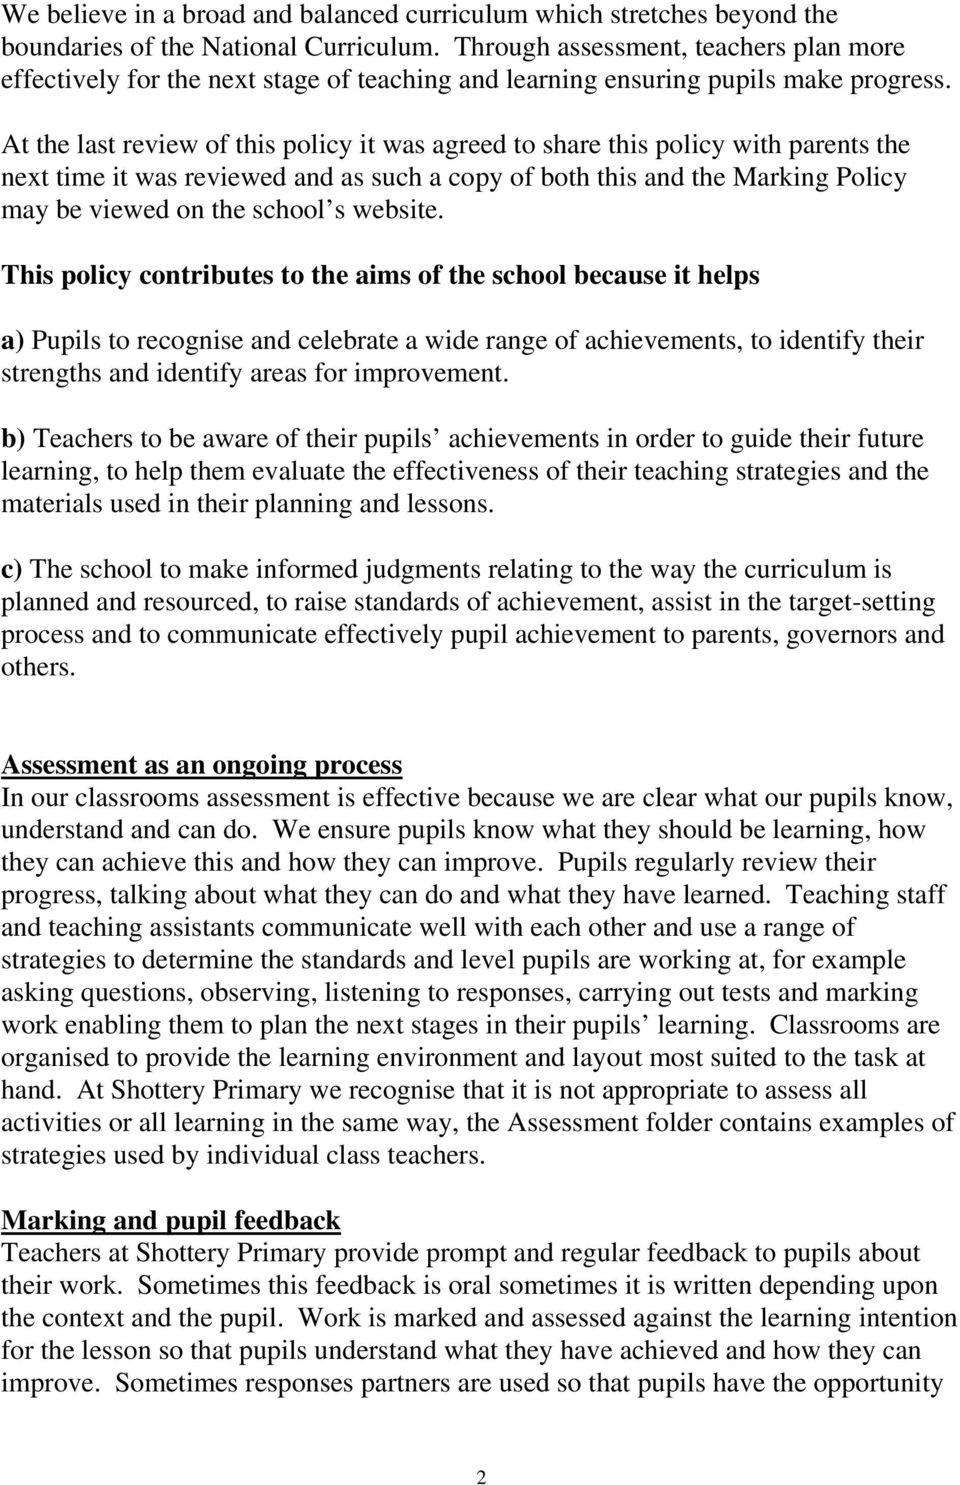 At the last review of this policy it was agreed to share this policy with parents the next time it was reviewed and as such a copy of both this and the Marking Policy may be viewed on the school s